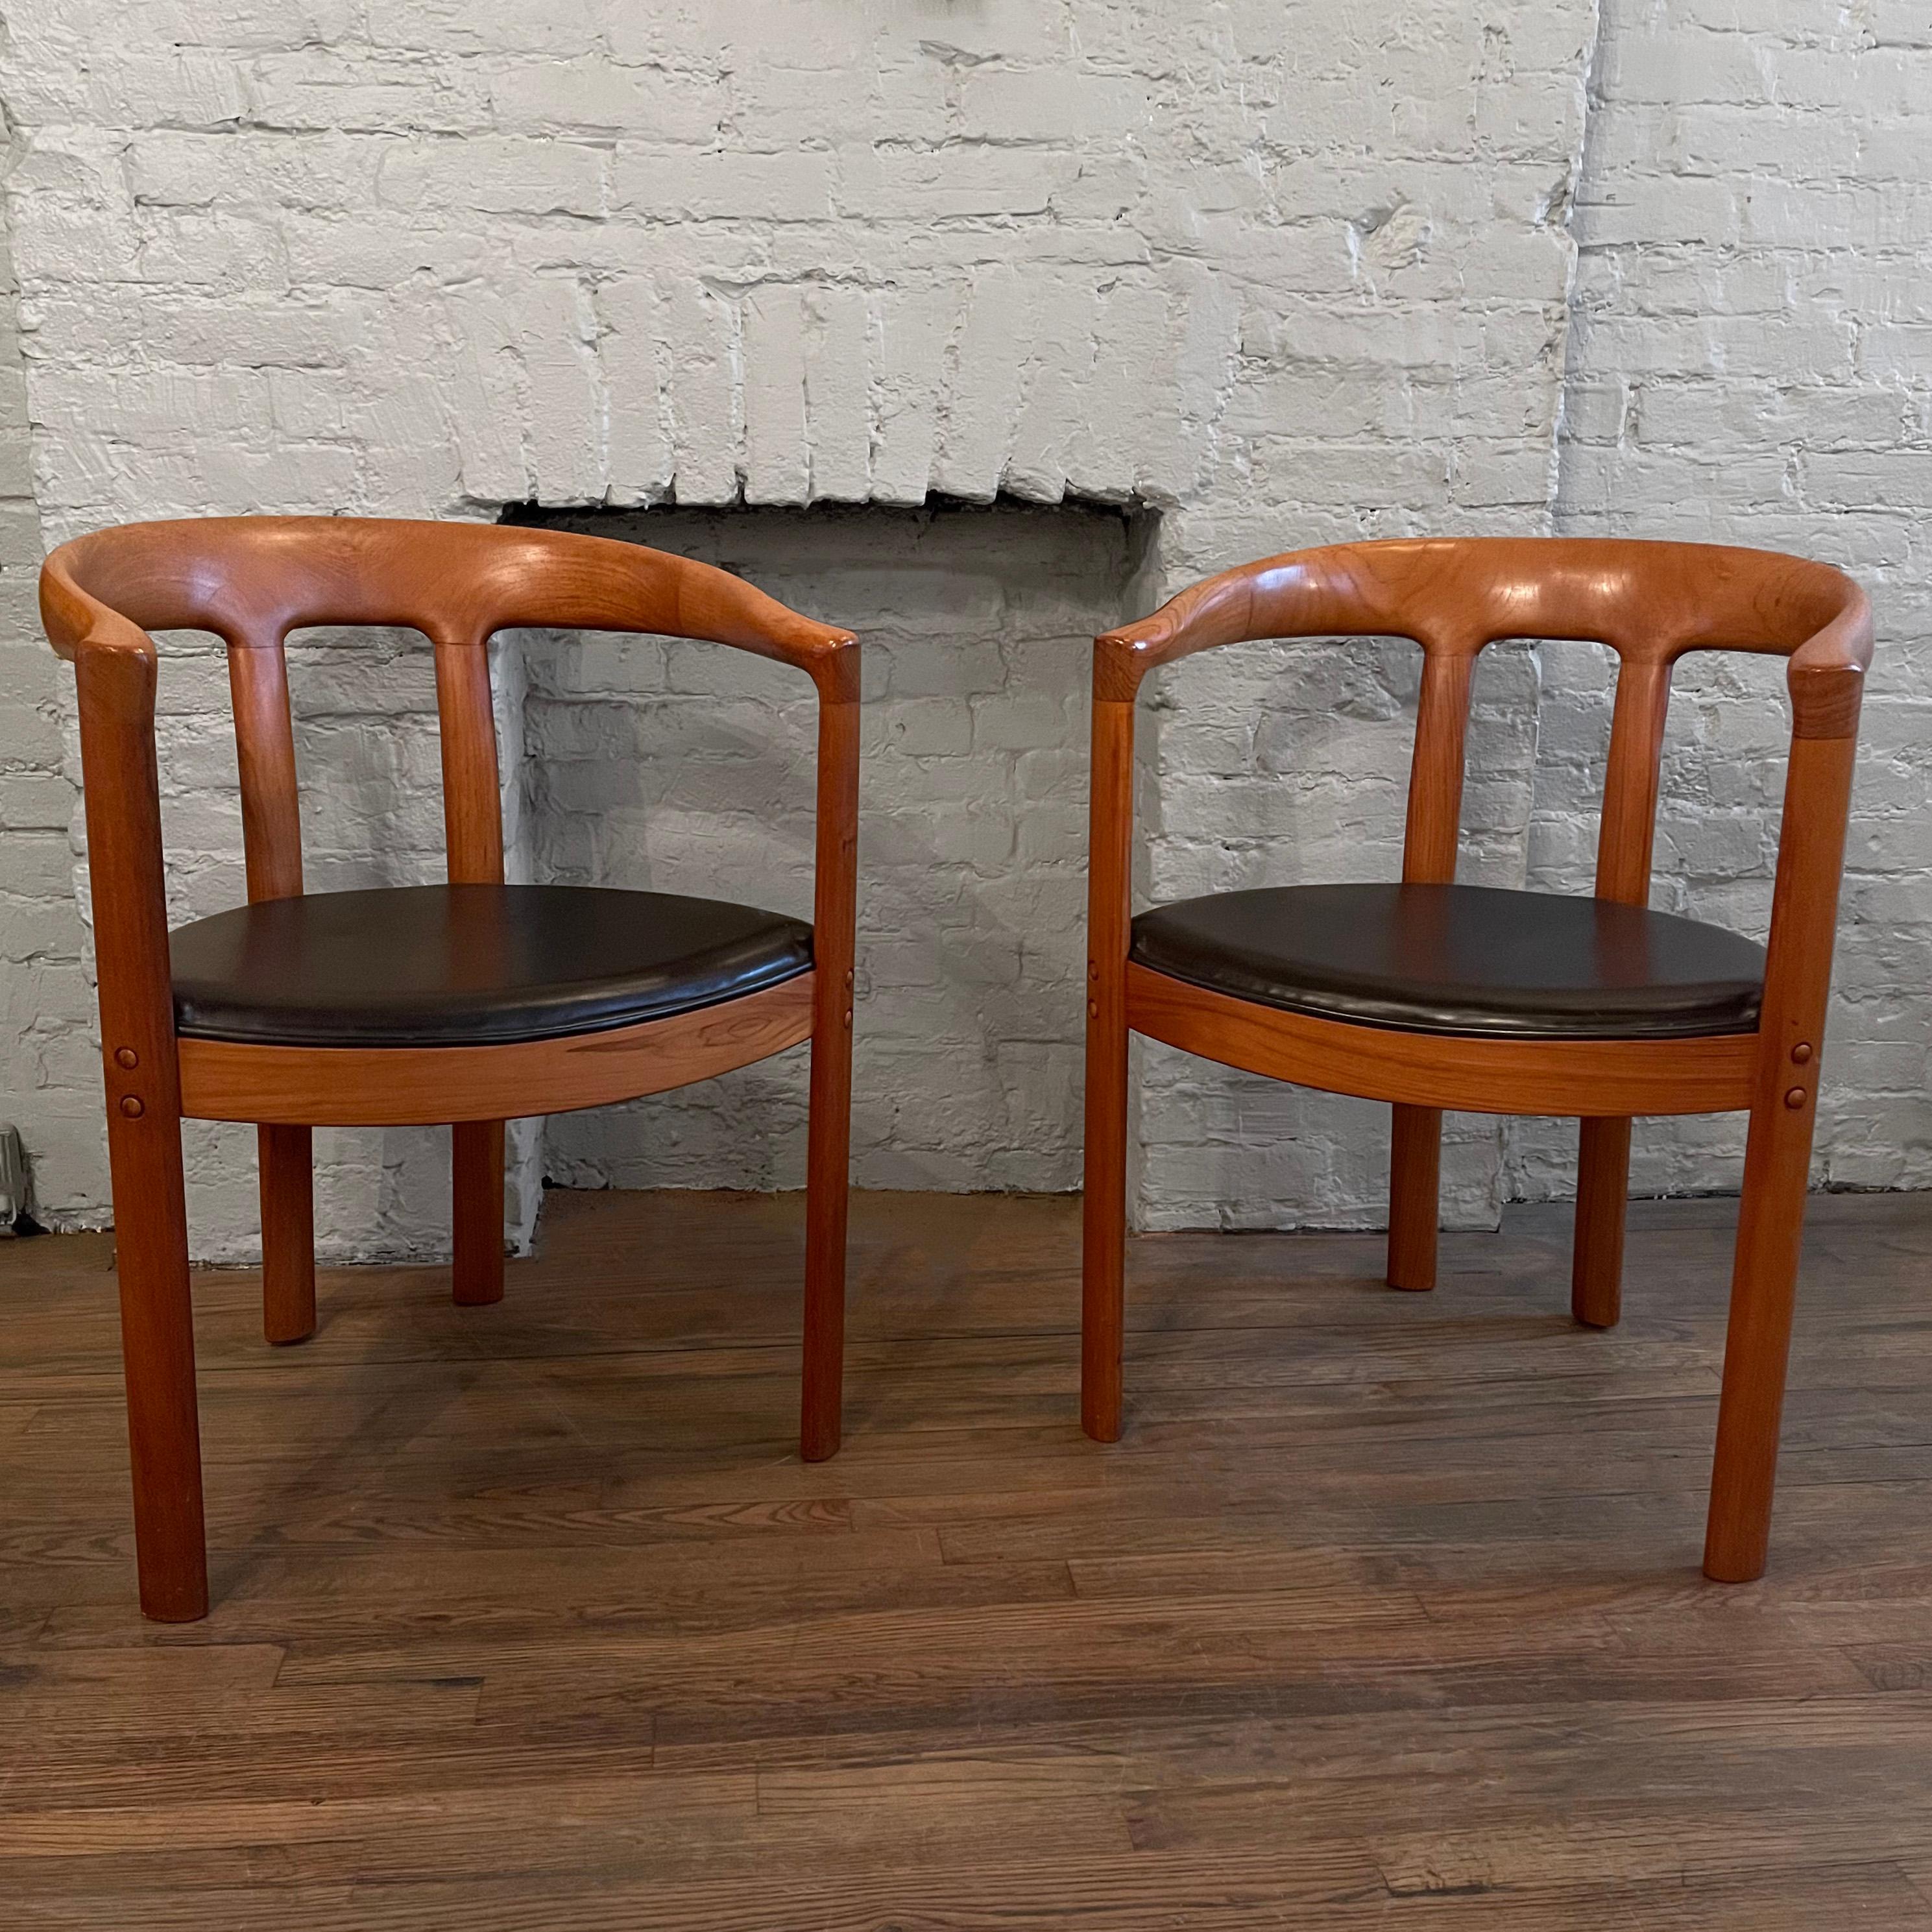 Pair of Danish modern, teak, barrel chairs with thick rounded frames and black vinyl seats. Their arm height measures 27.75 inches.